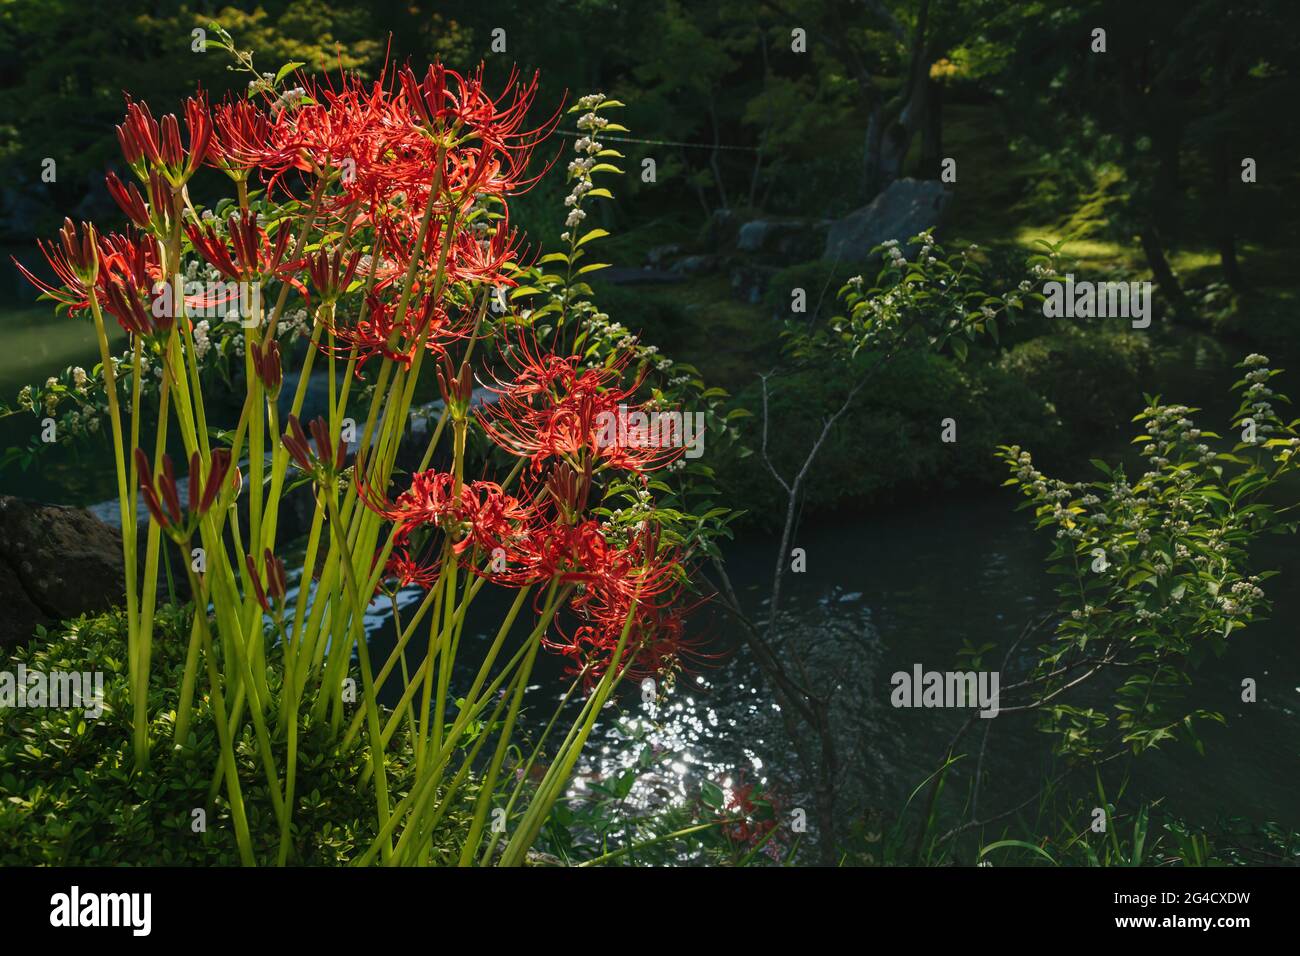 Sunlit blooming red spider lily, Lycoris radiata, in japanese zen garden in front of pond in Kyoto, Japan Stock Photo